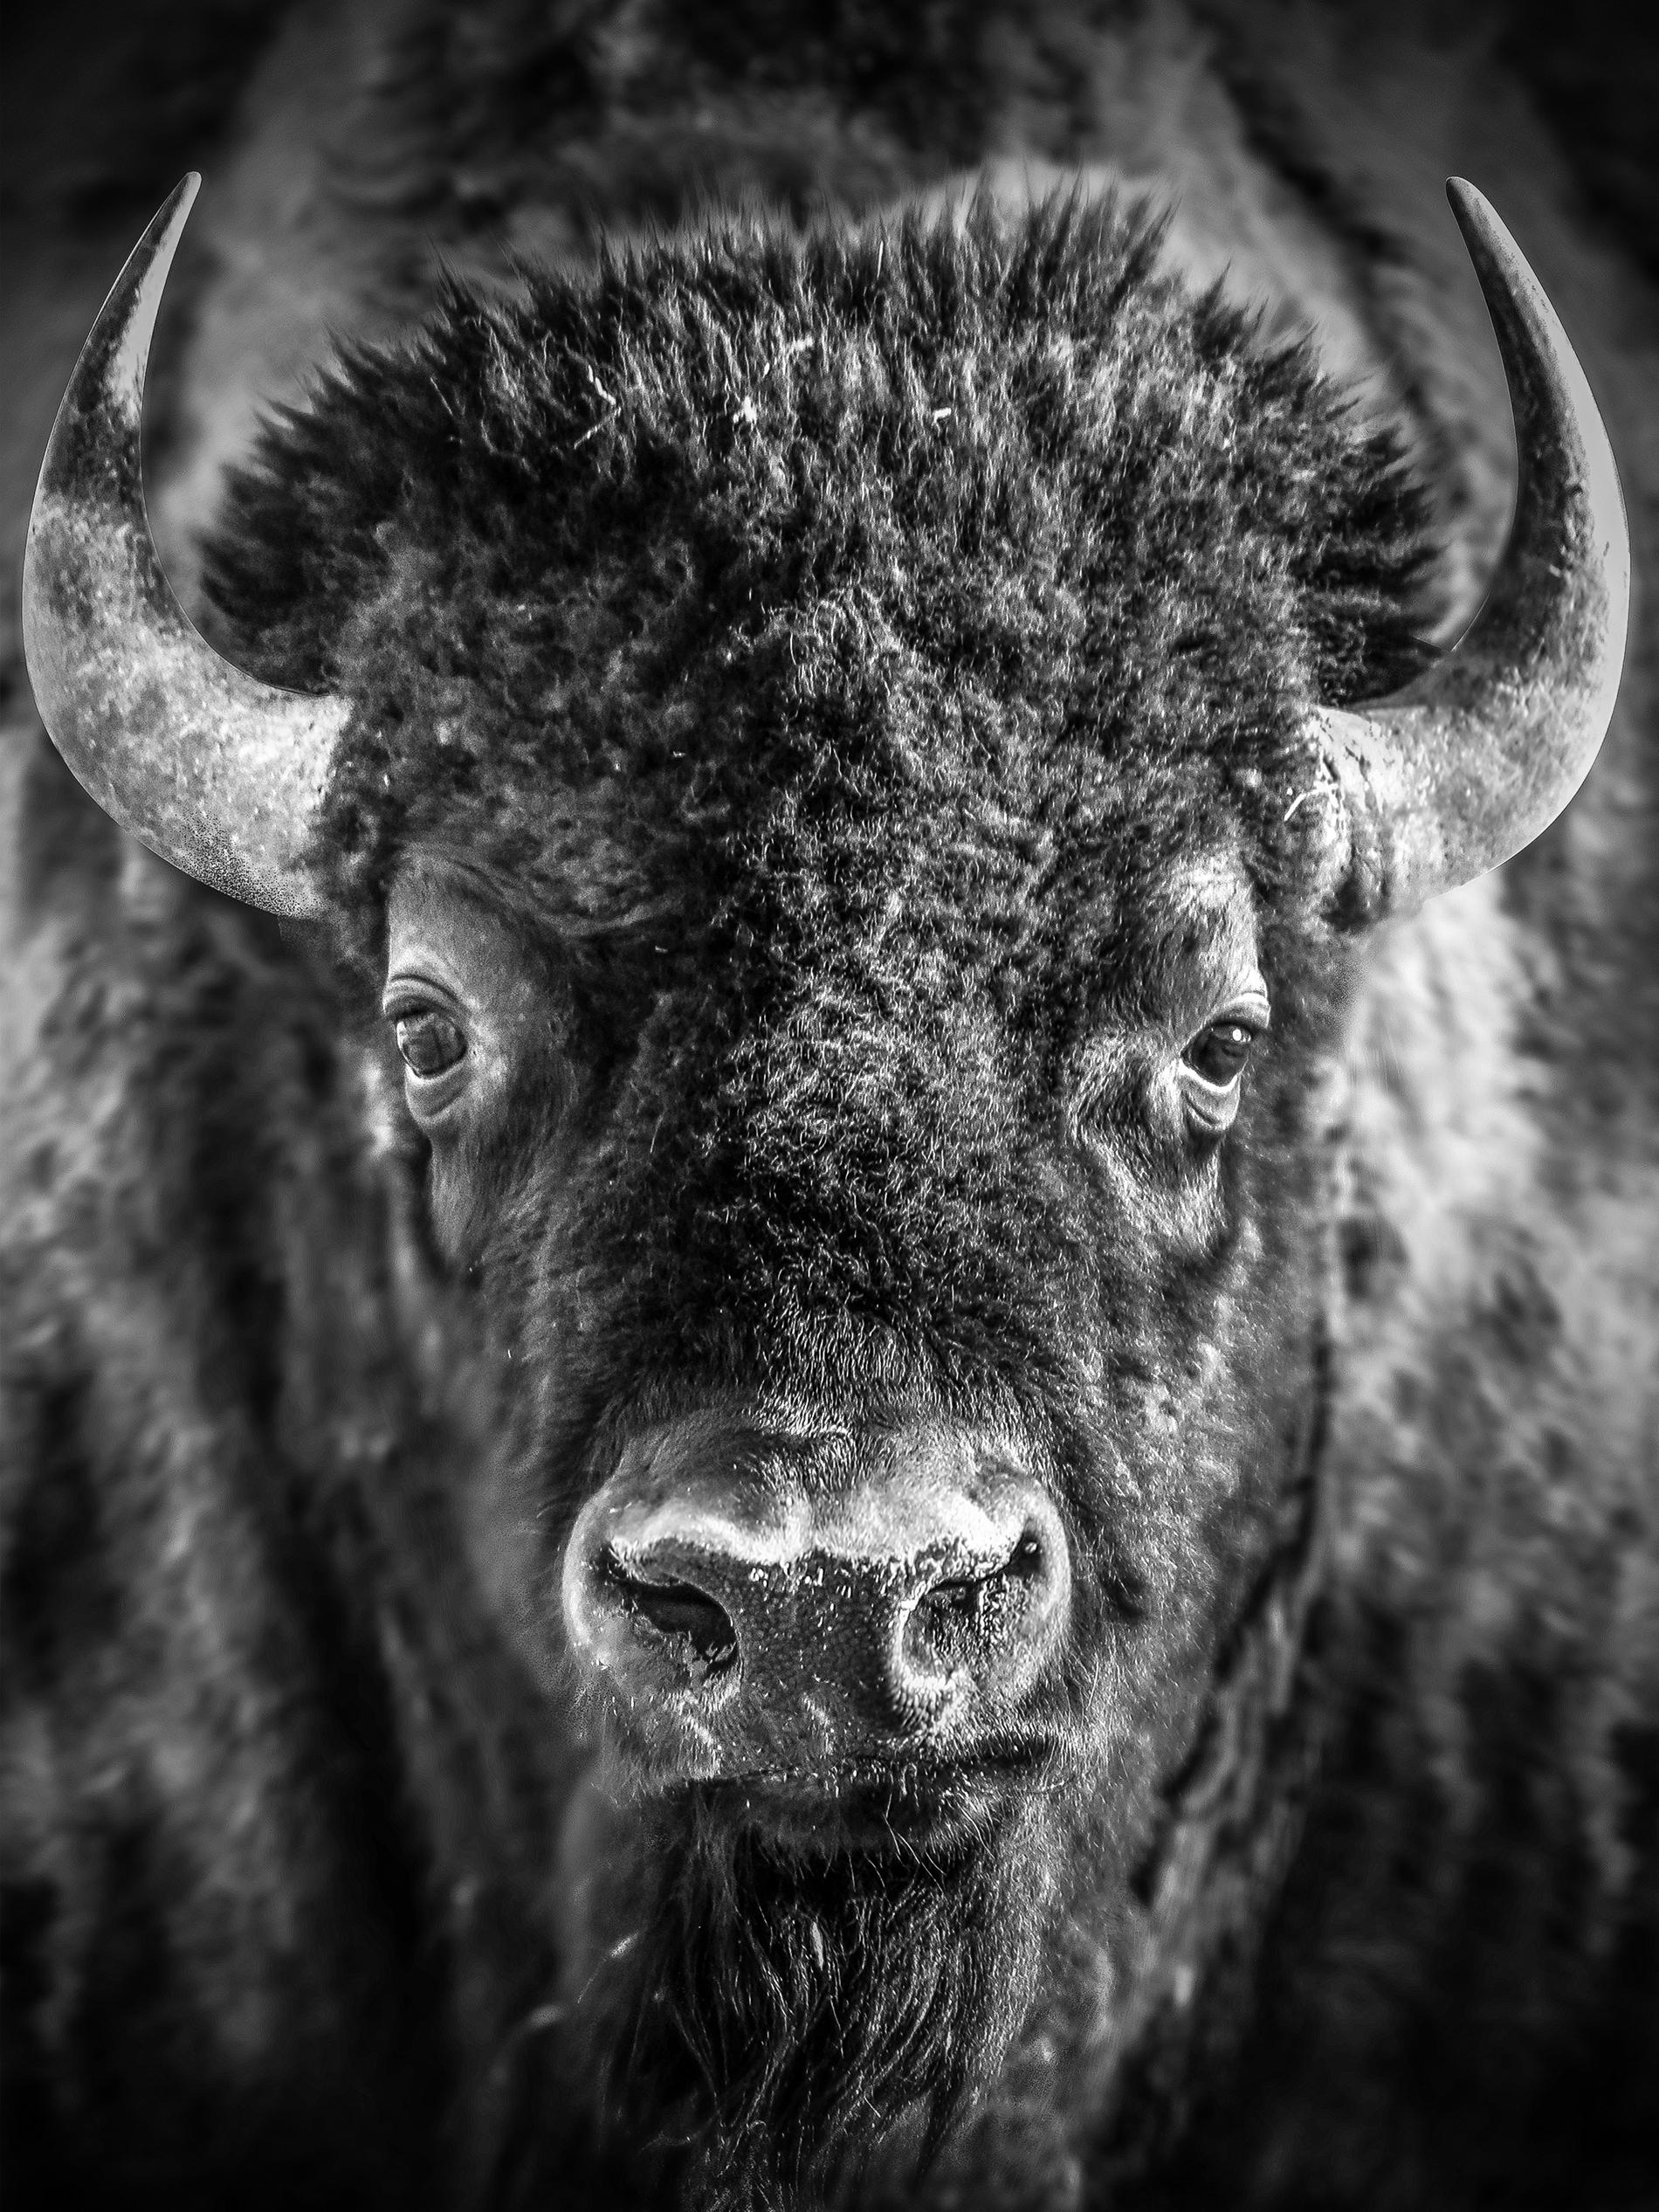 Shane Russeck Black and White Photograph - "Bison Portrait" 40x60 - Black & White Photography Bison Unsigned Buffalo Art